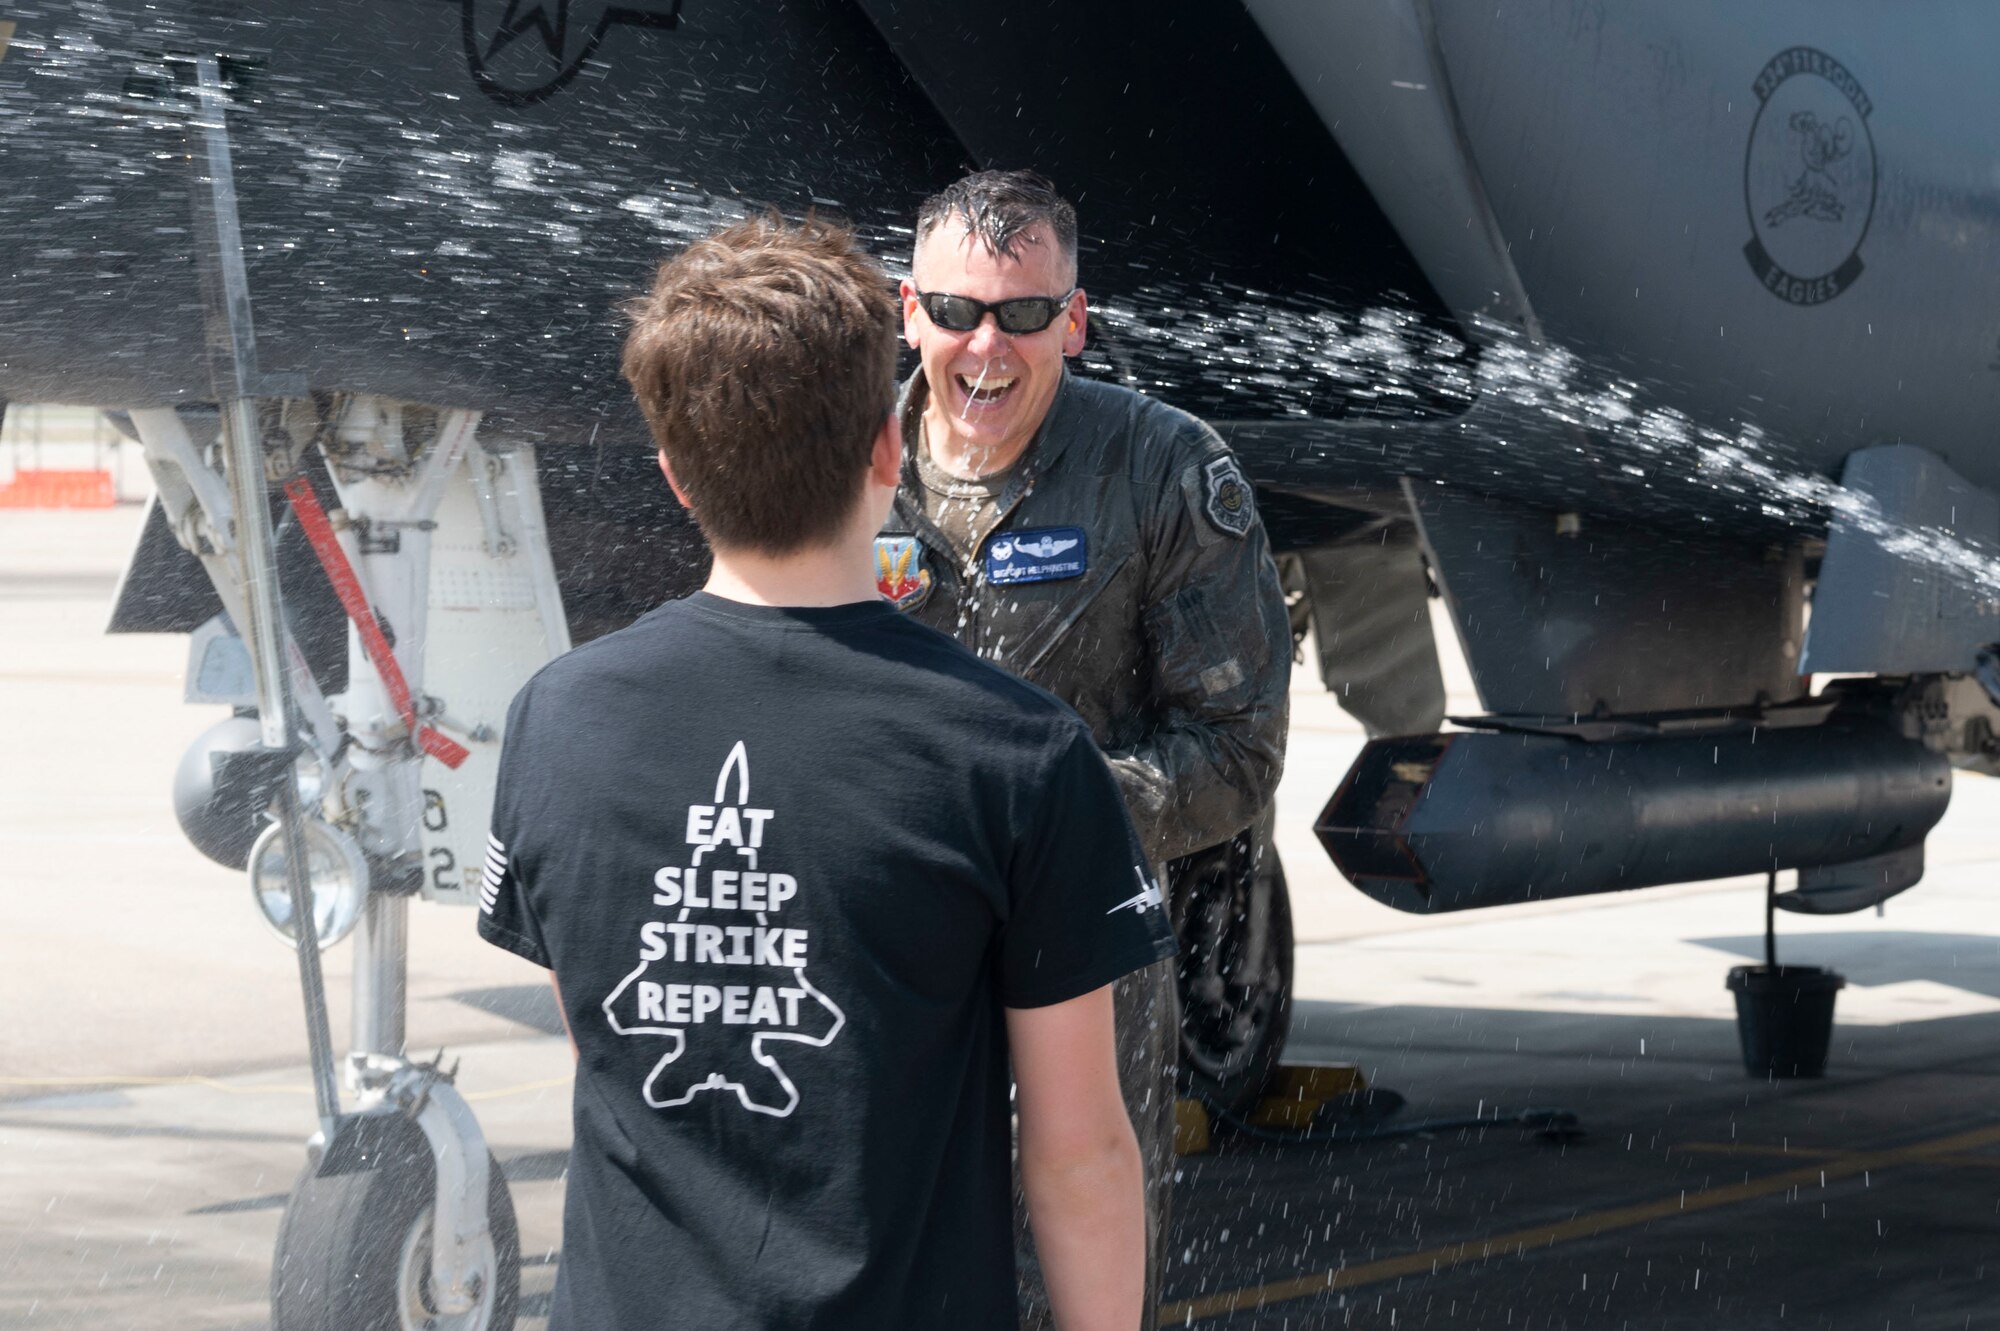 Col. Helphinstine, 4th Fighter Wing commander, gets sprayed with water by his family after he returns from his final flight at Seymour Johnson Air Force Base, North Carolina, May 2, 2022. Traditionally, air crew get sprayed down after their final flight. (U.S. Air Force photo by Senior Airman Kevin Holloway)